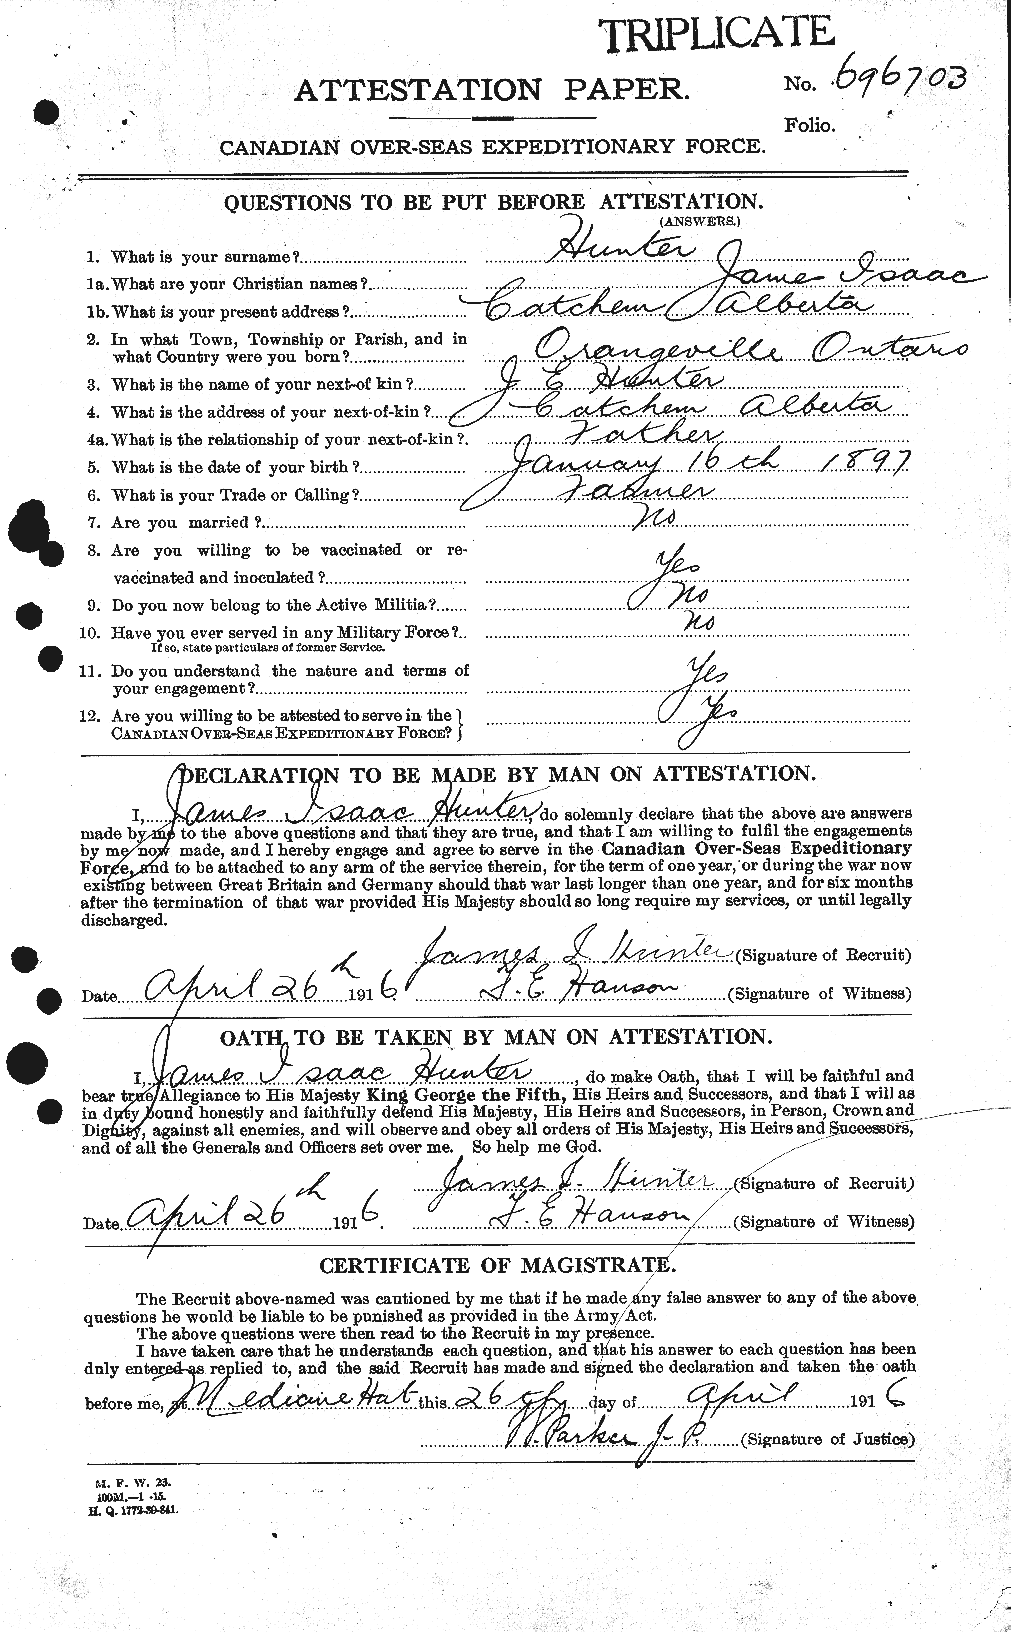 Personnel Records of the First World War - CEF 410296a